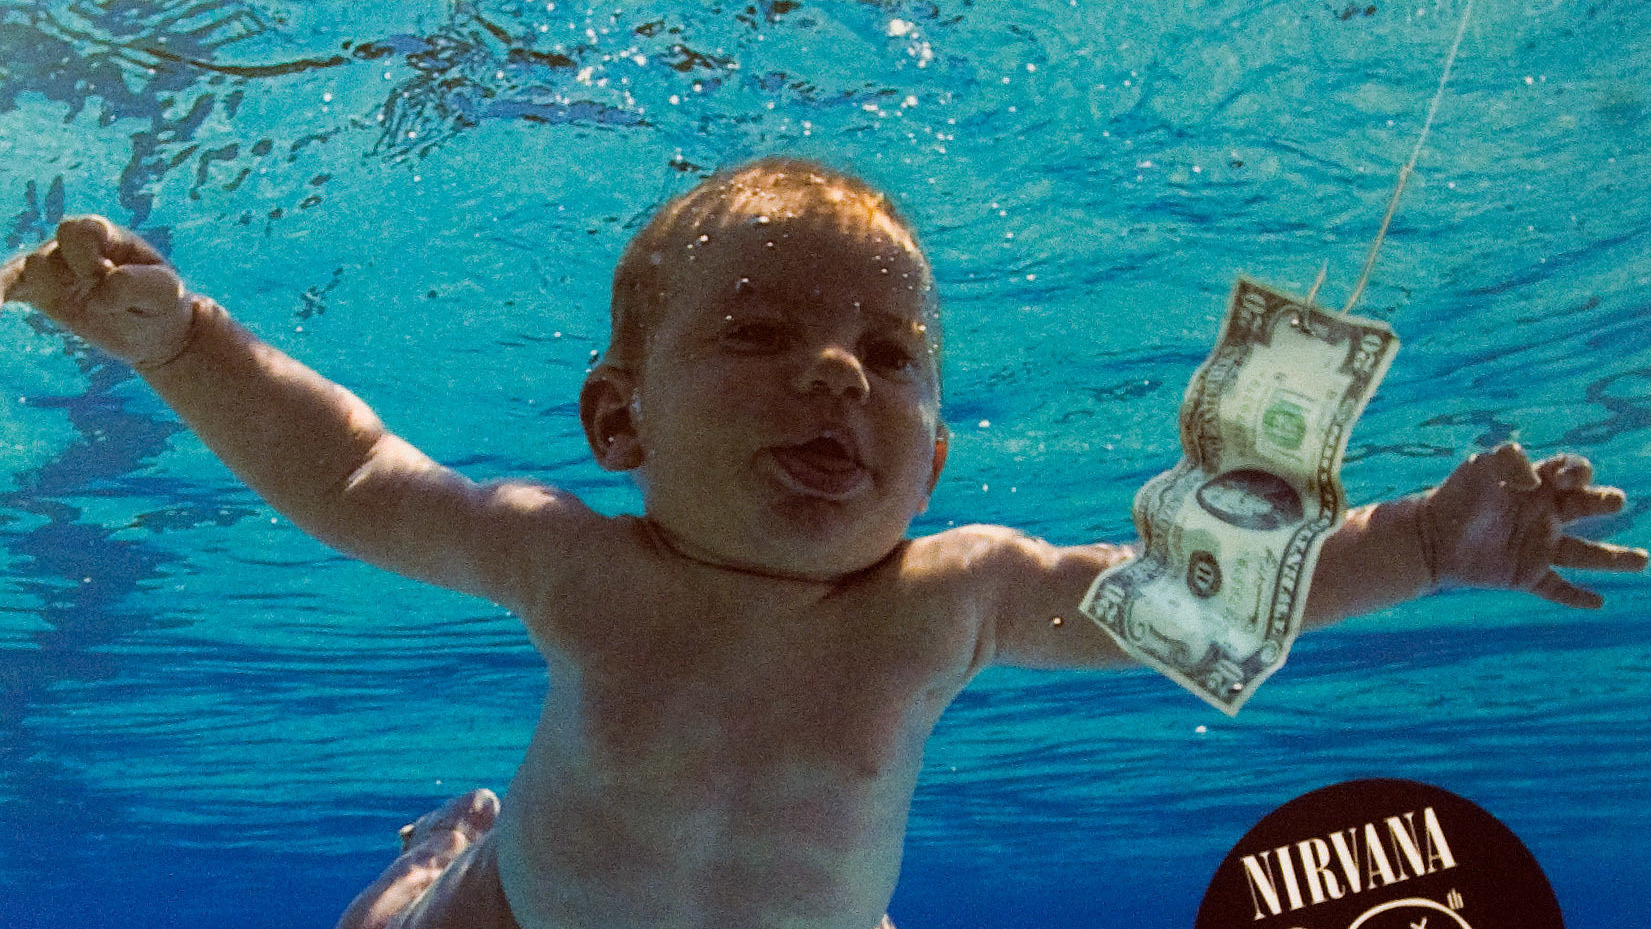 Featured image for “Man Photographed As A Baby On ‘Nevermind’ Cover Sues Nirvana For Sexual Exploitation”